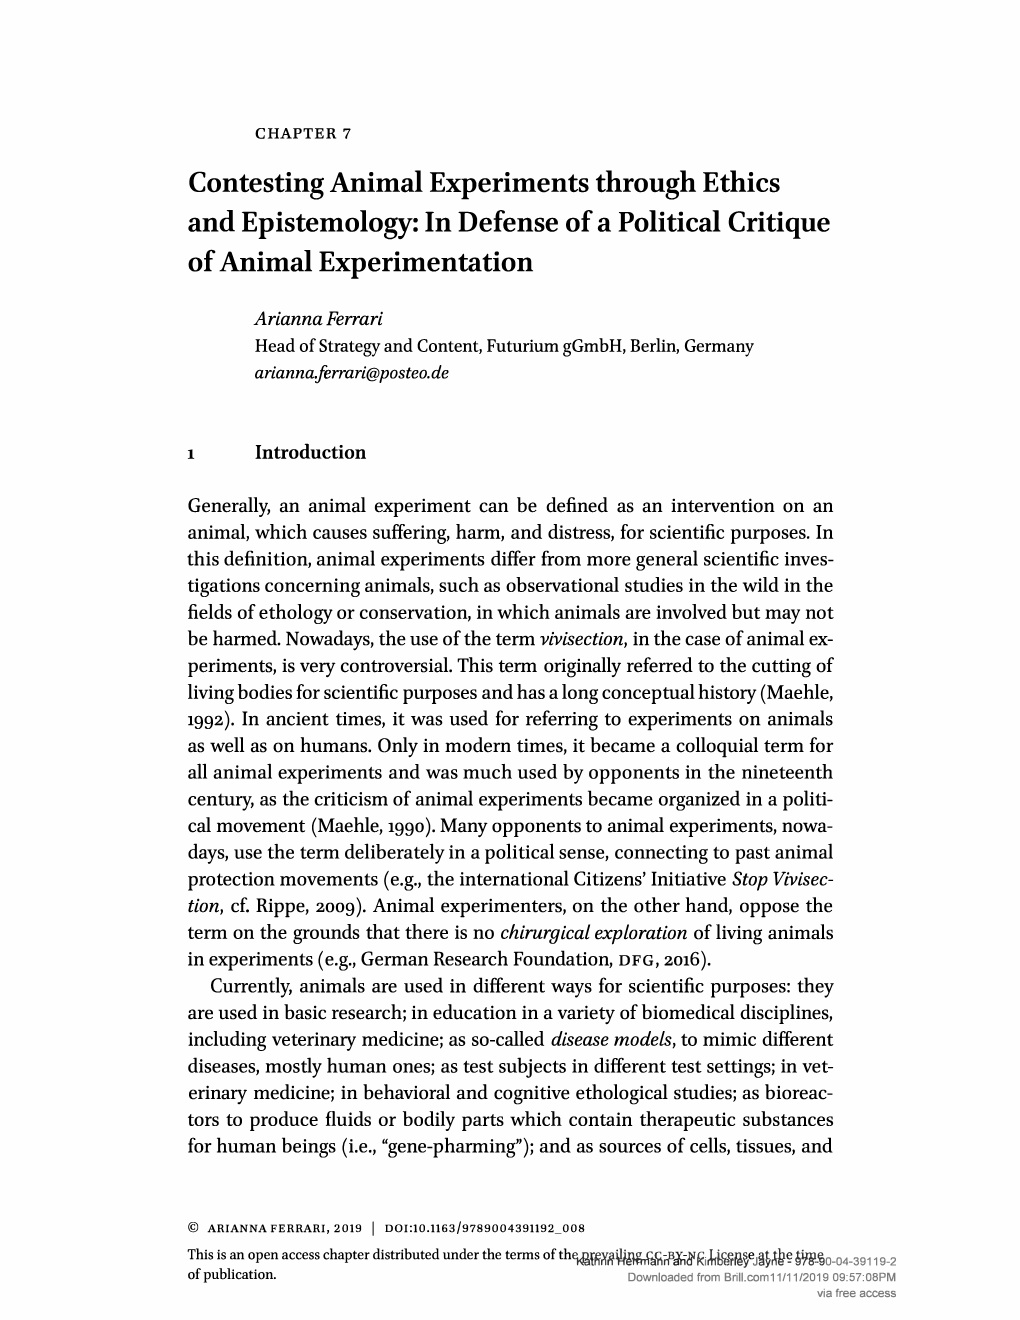 Contesting Animal Experiments Through Ethics and Epistemology: in Defense of a Political Critique of Animal Experimentation